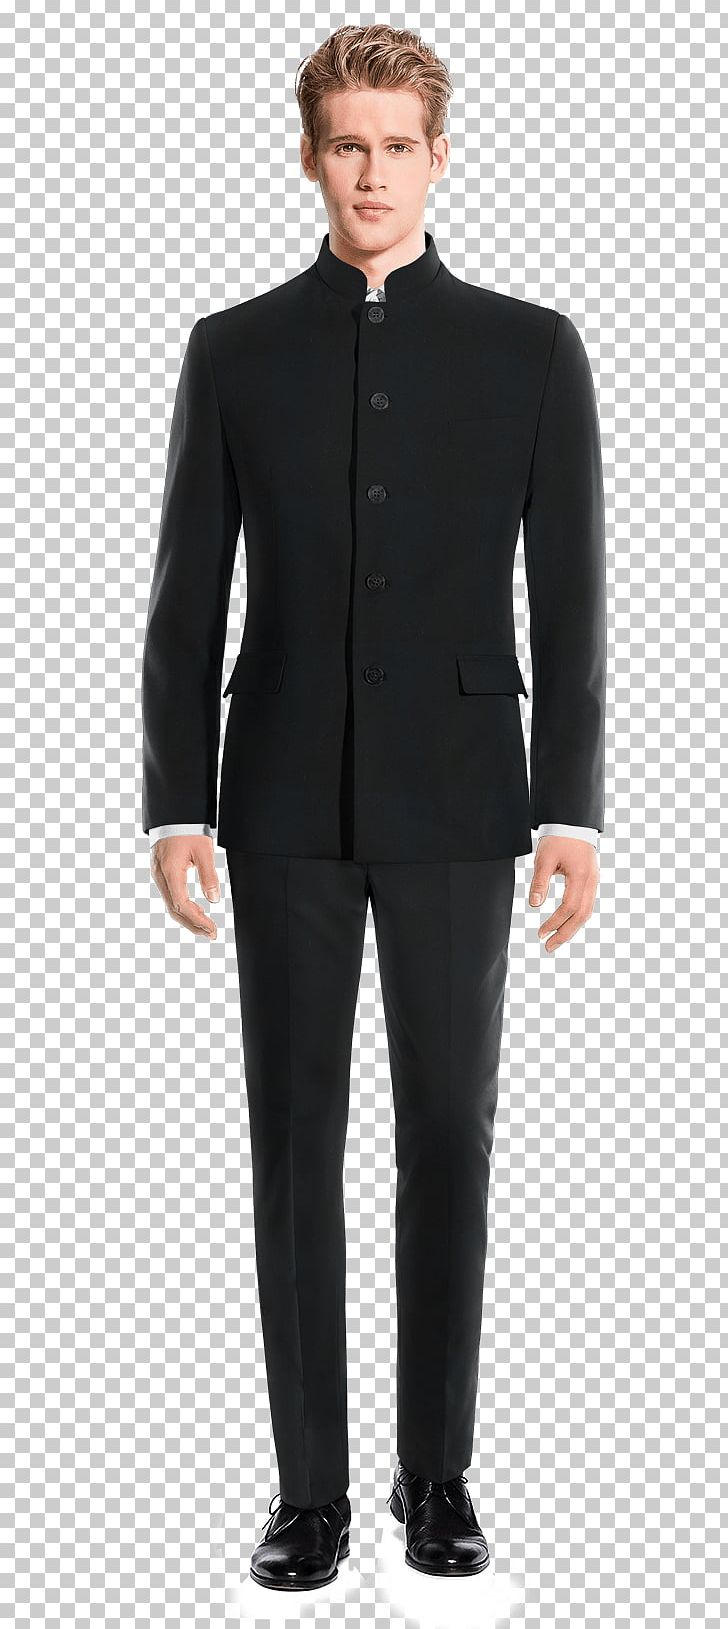 Suit Tailor Clothing Pants Coat PNG, Clipart, Bespoke Tailoring, Black, Blazer, Businessperson, Clothing Free PNG Download